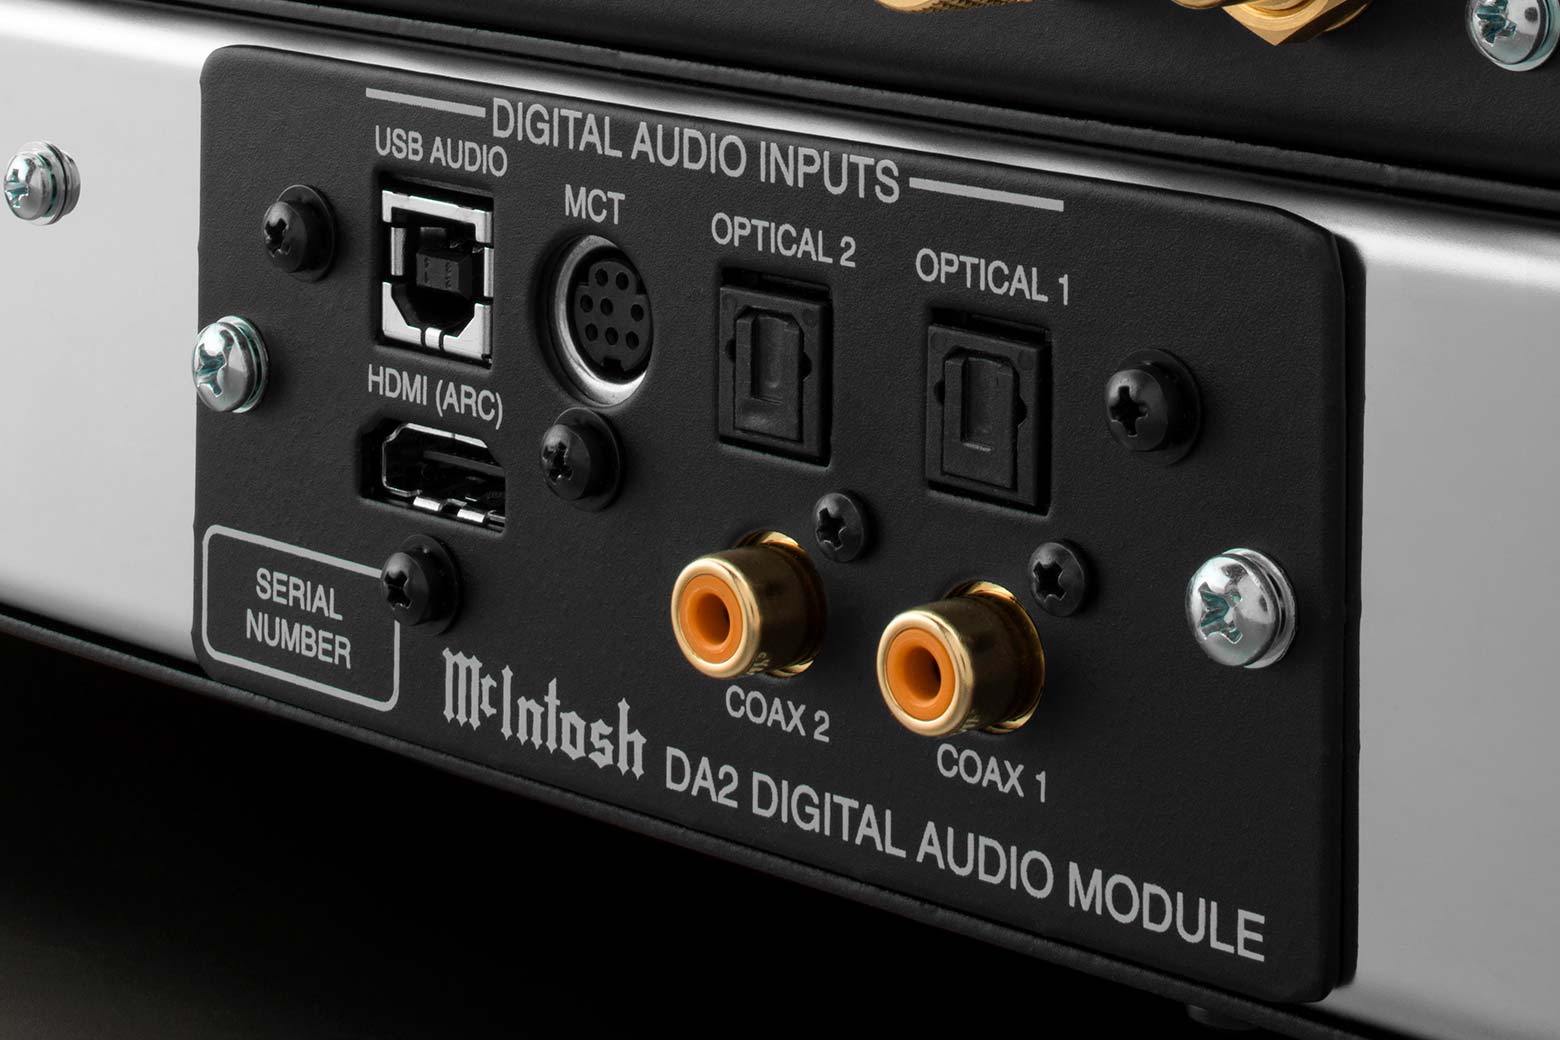 McIntosh DA2 Upgrade Kit (In-Store Purchases Only)